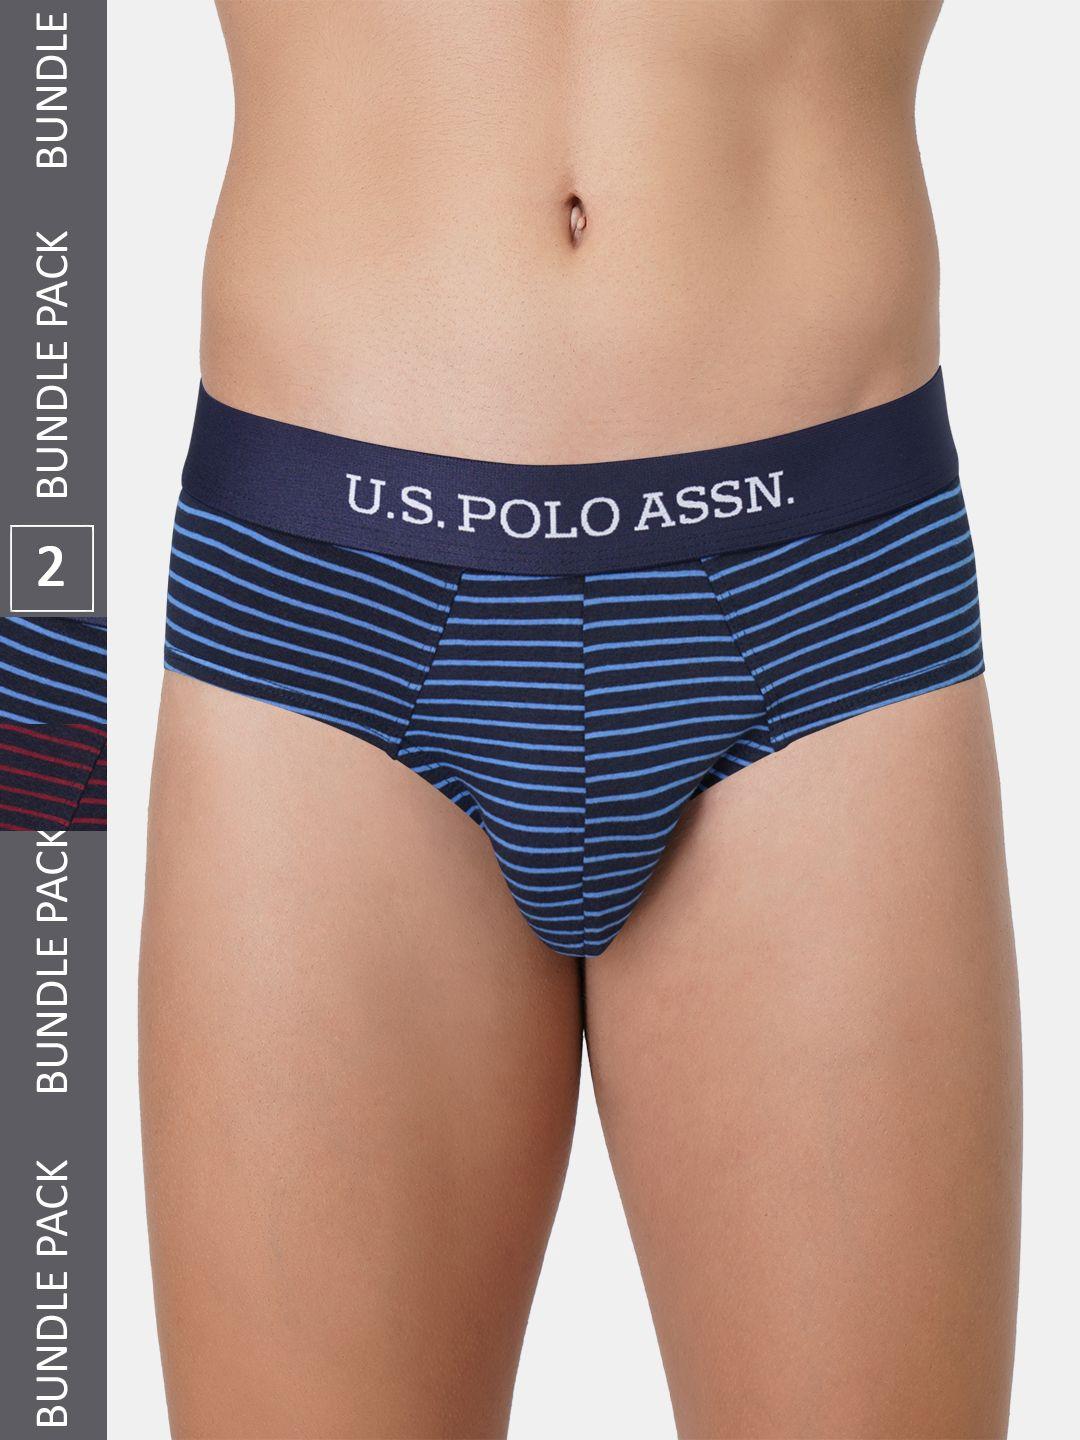 U.S. Polo Assn. Men Pack Of 2 Striped Anti Bacterial Basic Briefs